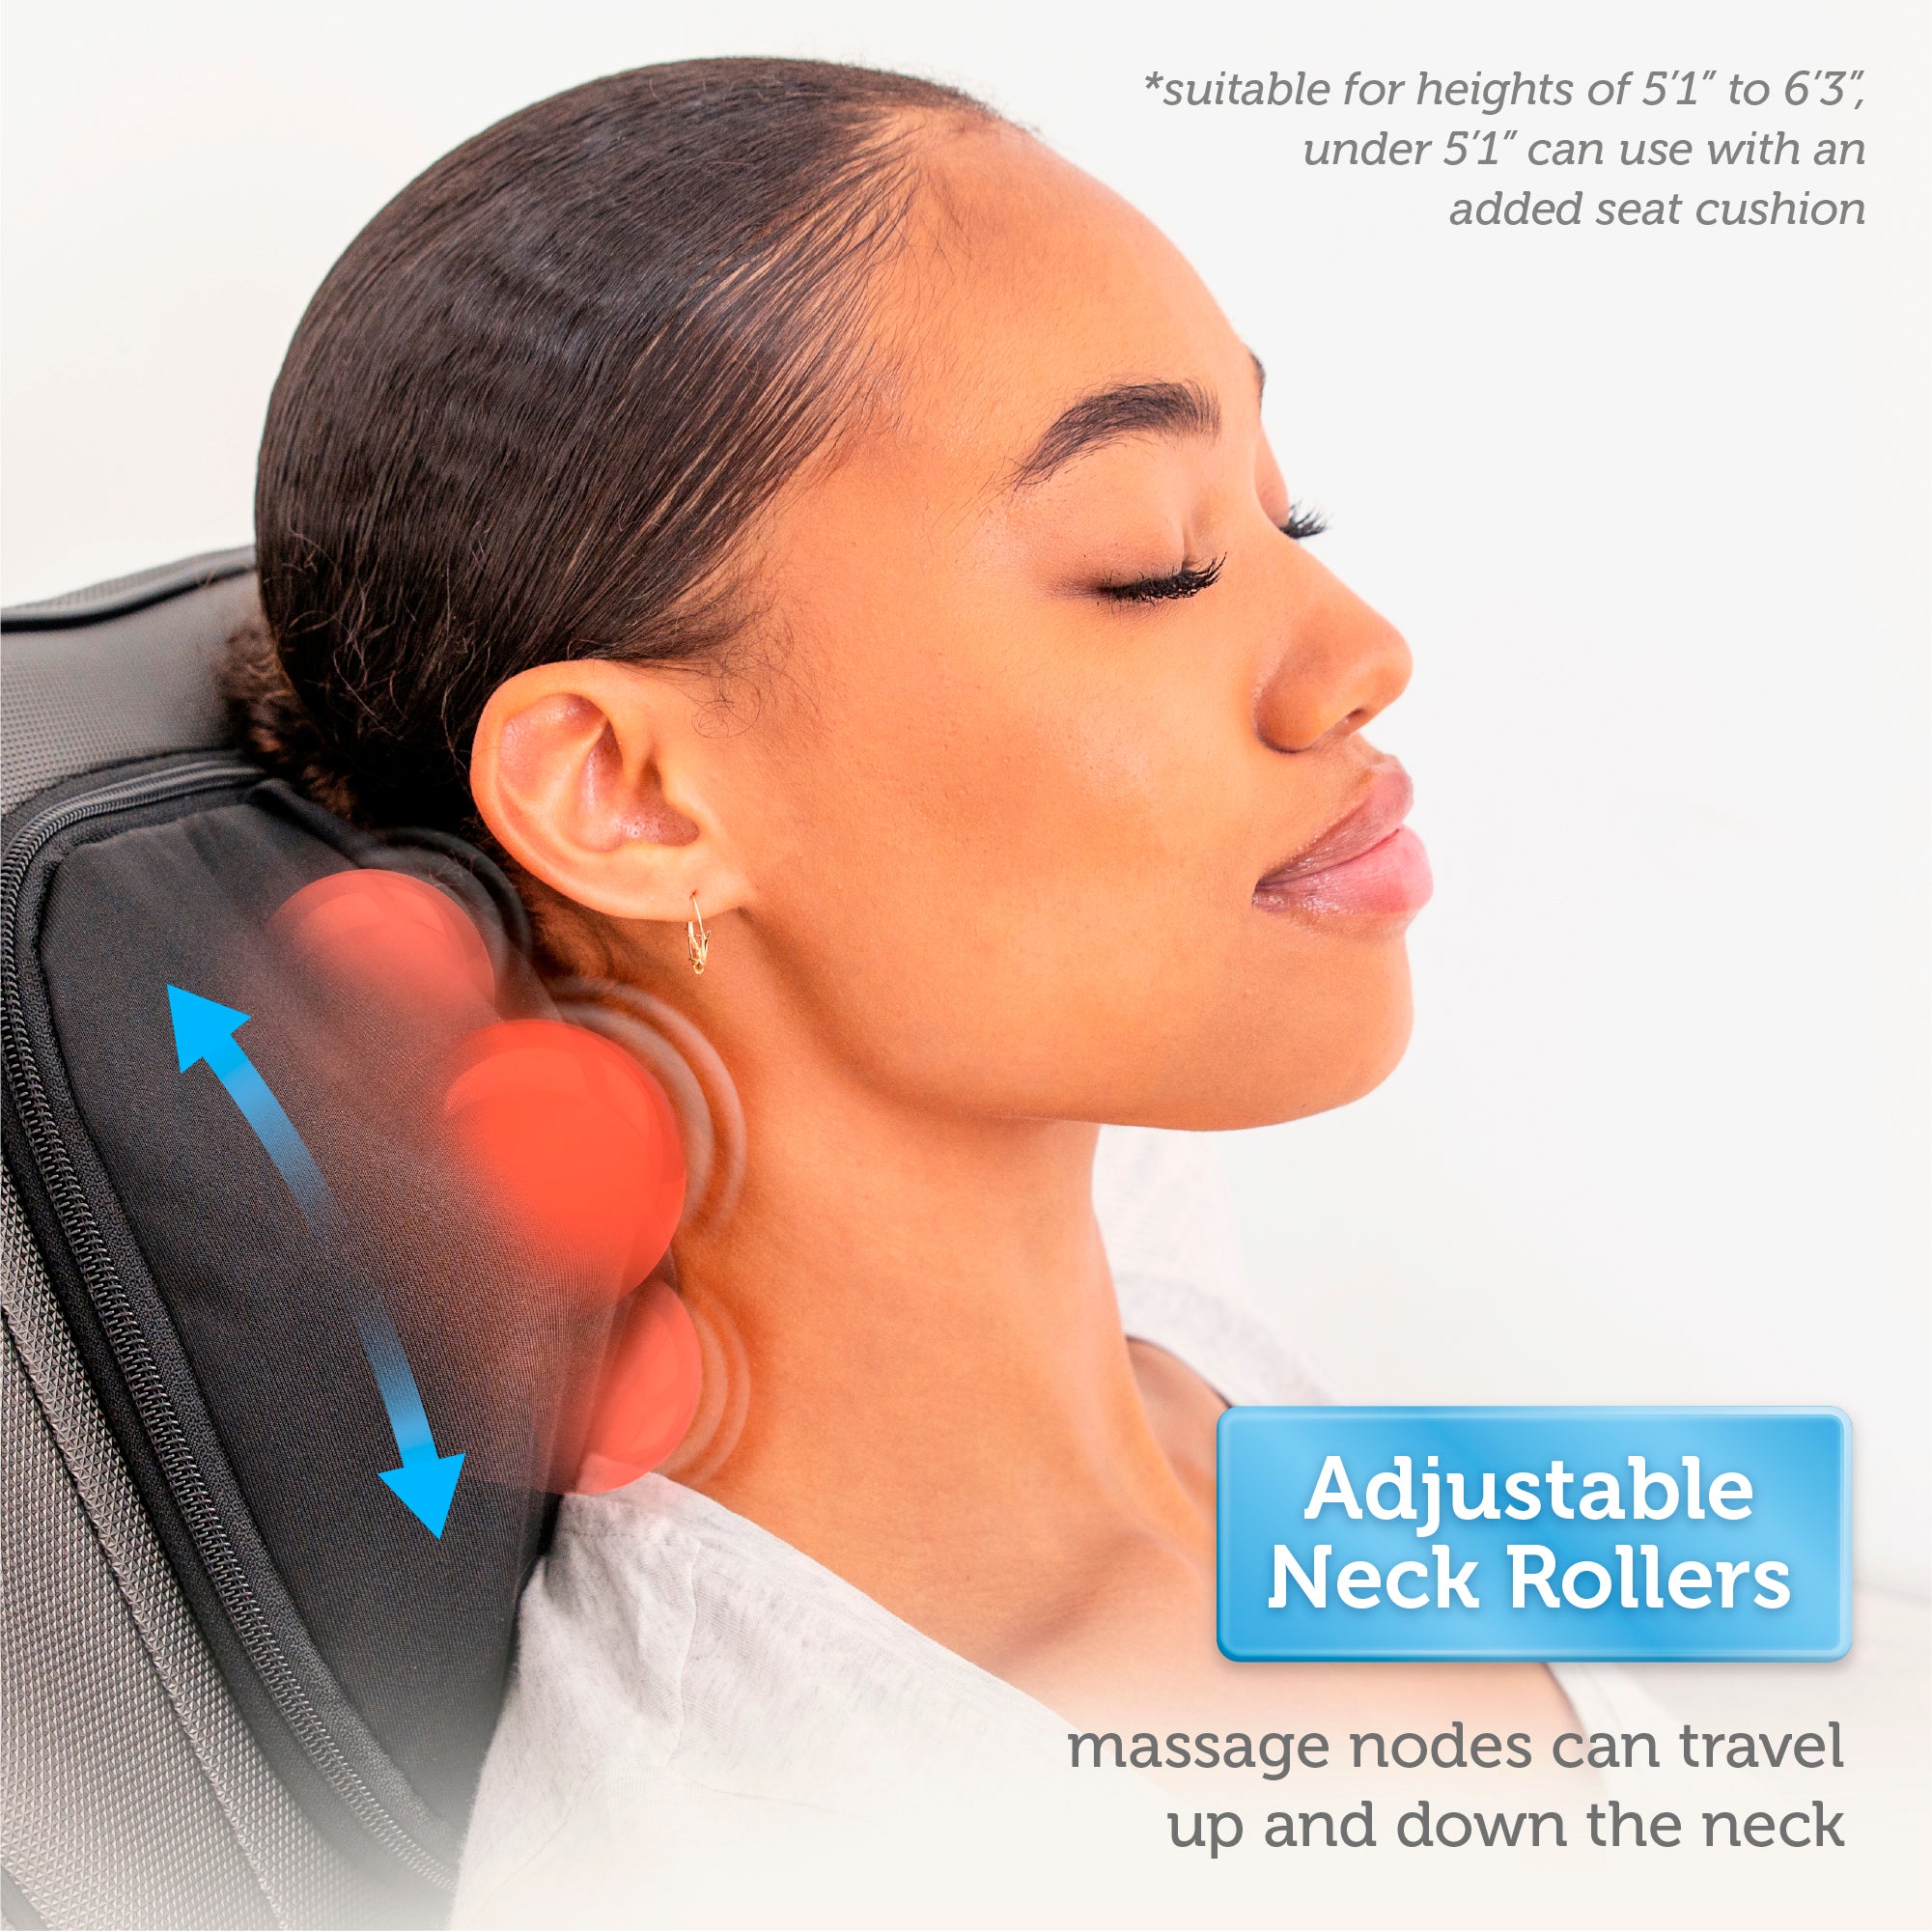 Comfier Shiatsu Neck Back Massager with Heat, Air Compression,Massage Chair  Pad, Gifts CF-WM09A - Coupon Codes, Promo Codes, Daily Deals, Save Money  Today